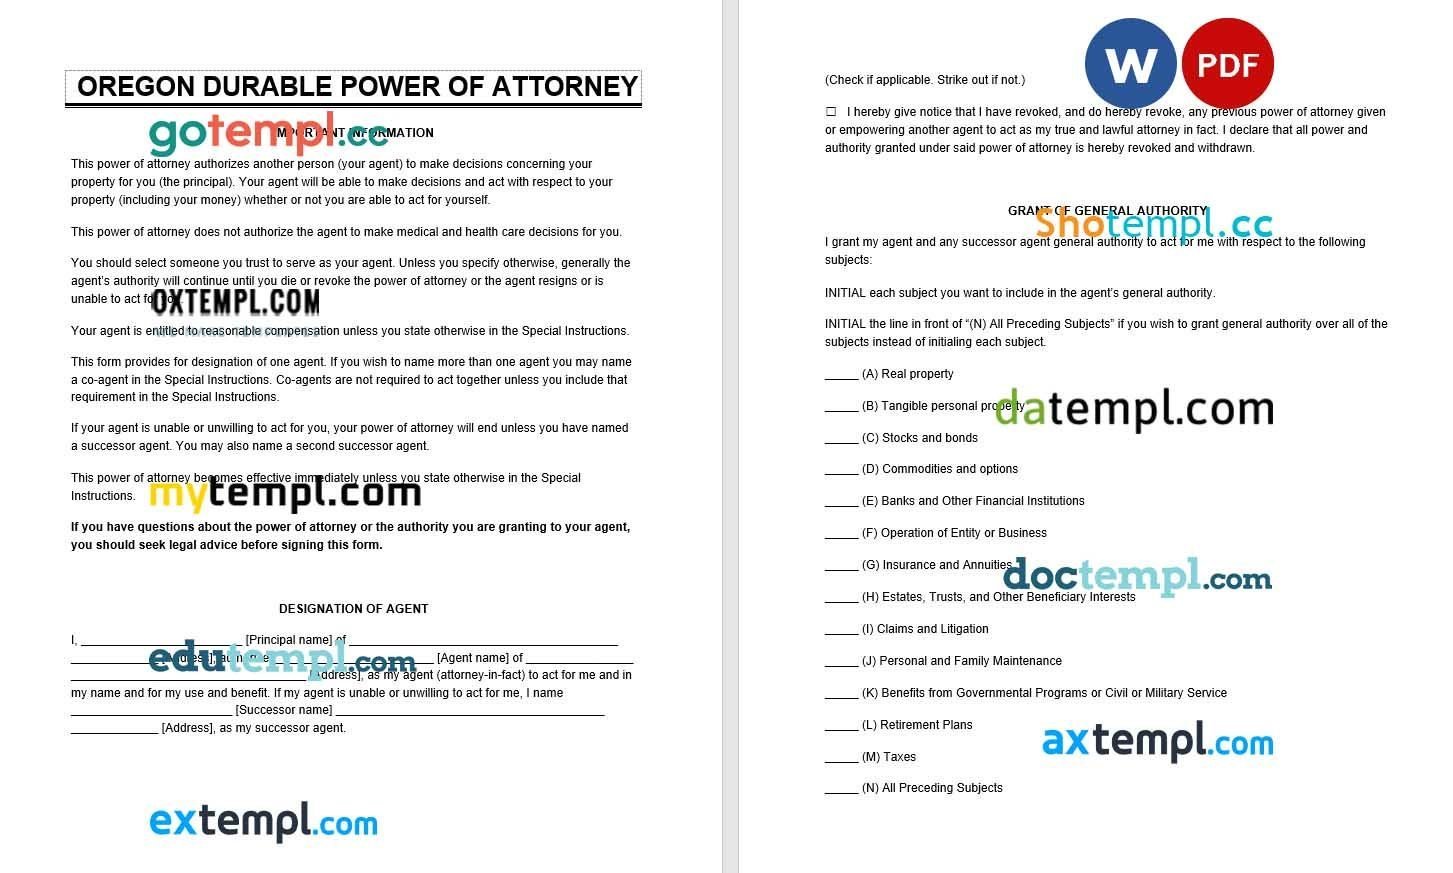 Request for Power of Attorney Letter example, fully editable